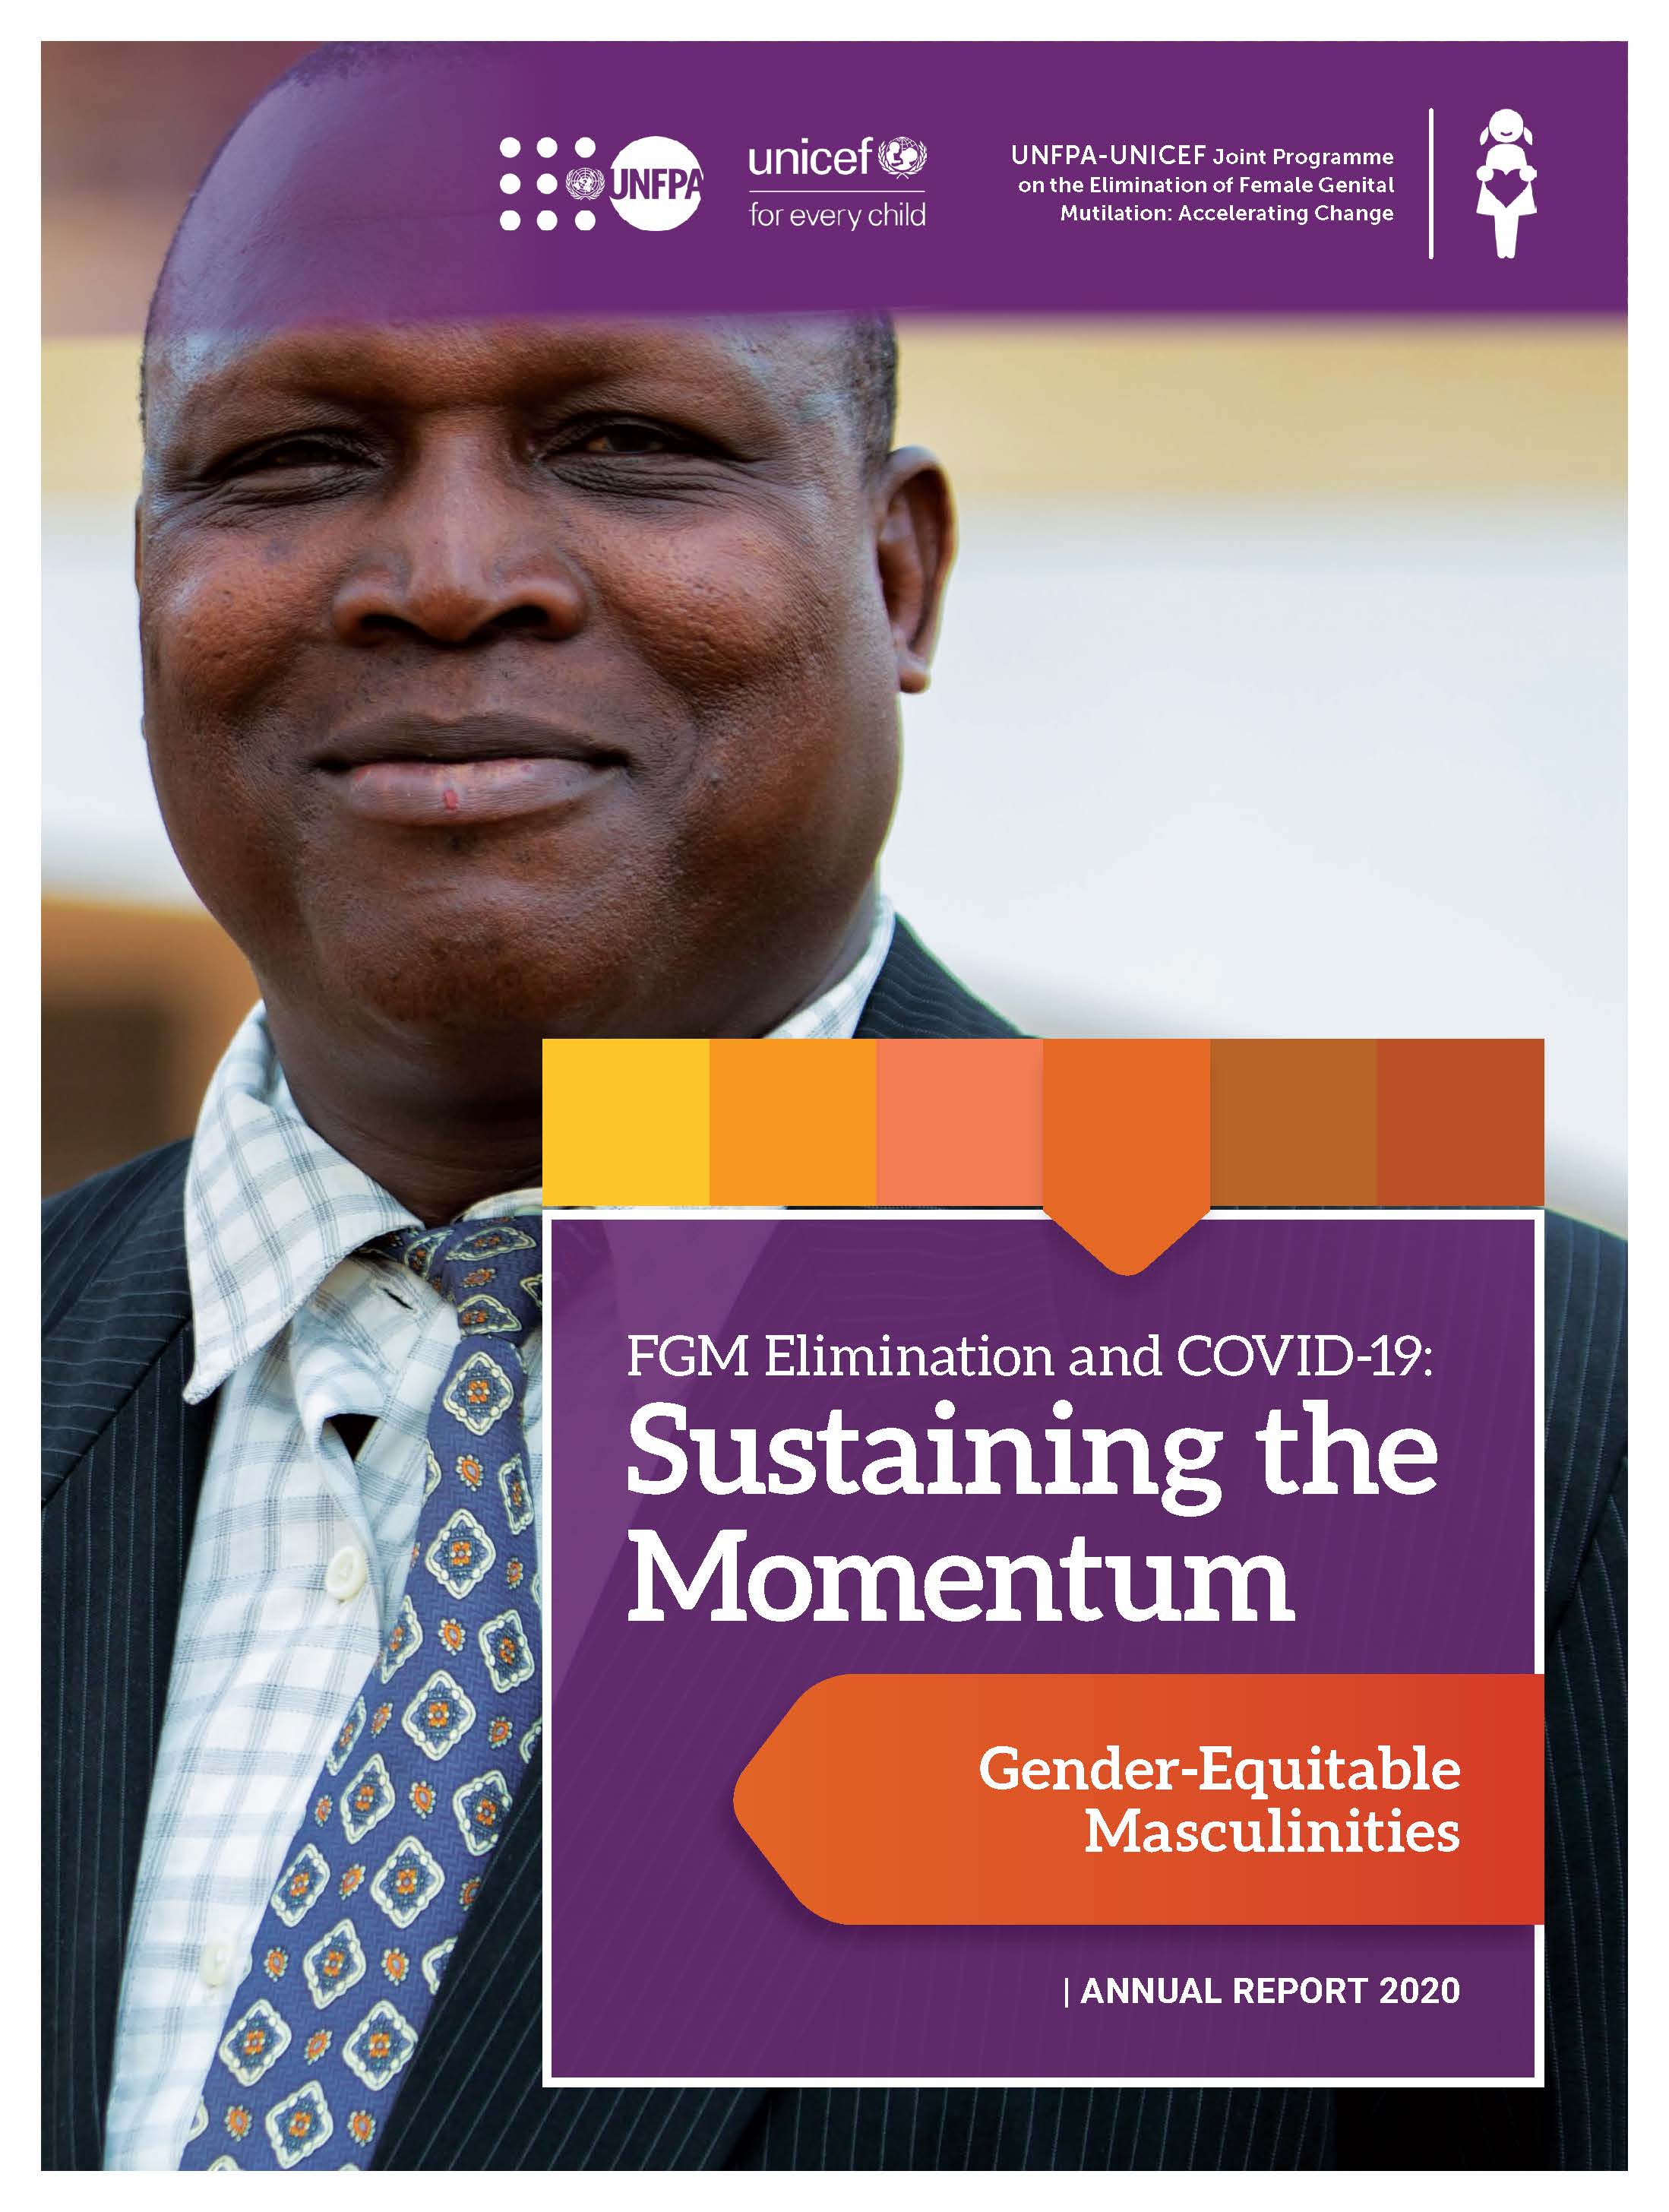 2020 Annual Report on FGM - Gender-Equitable Masculinities in Eliminating…